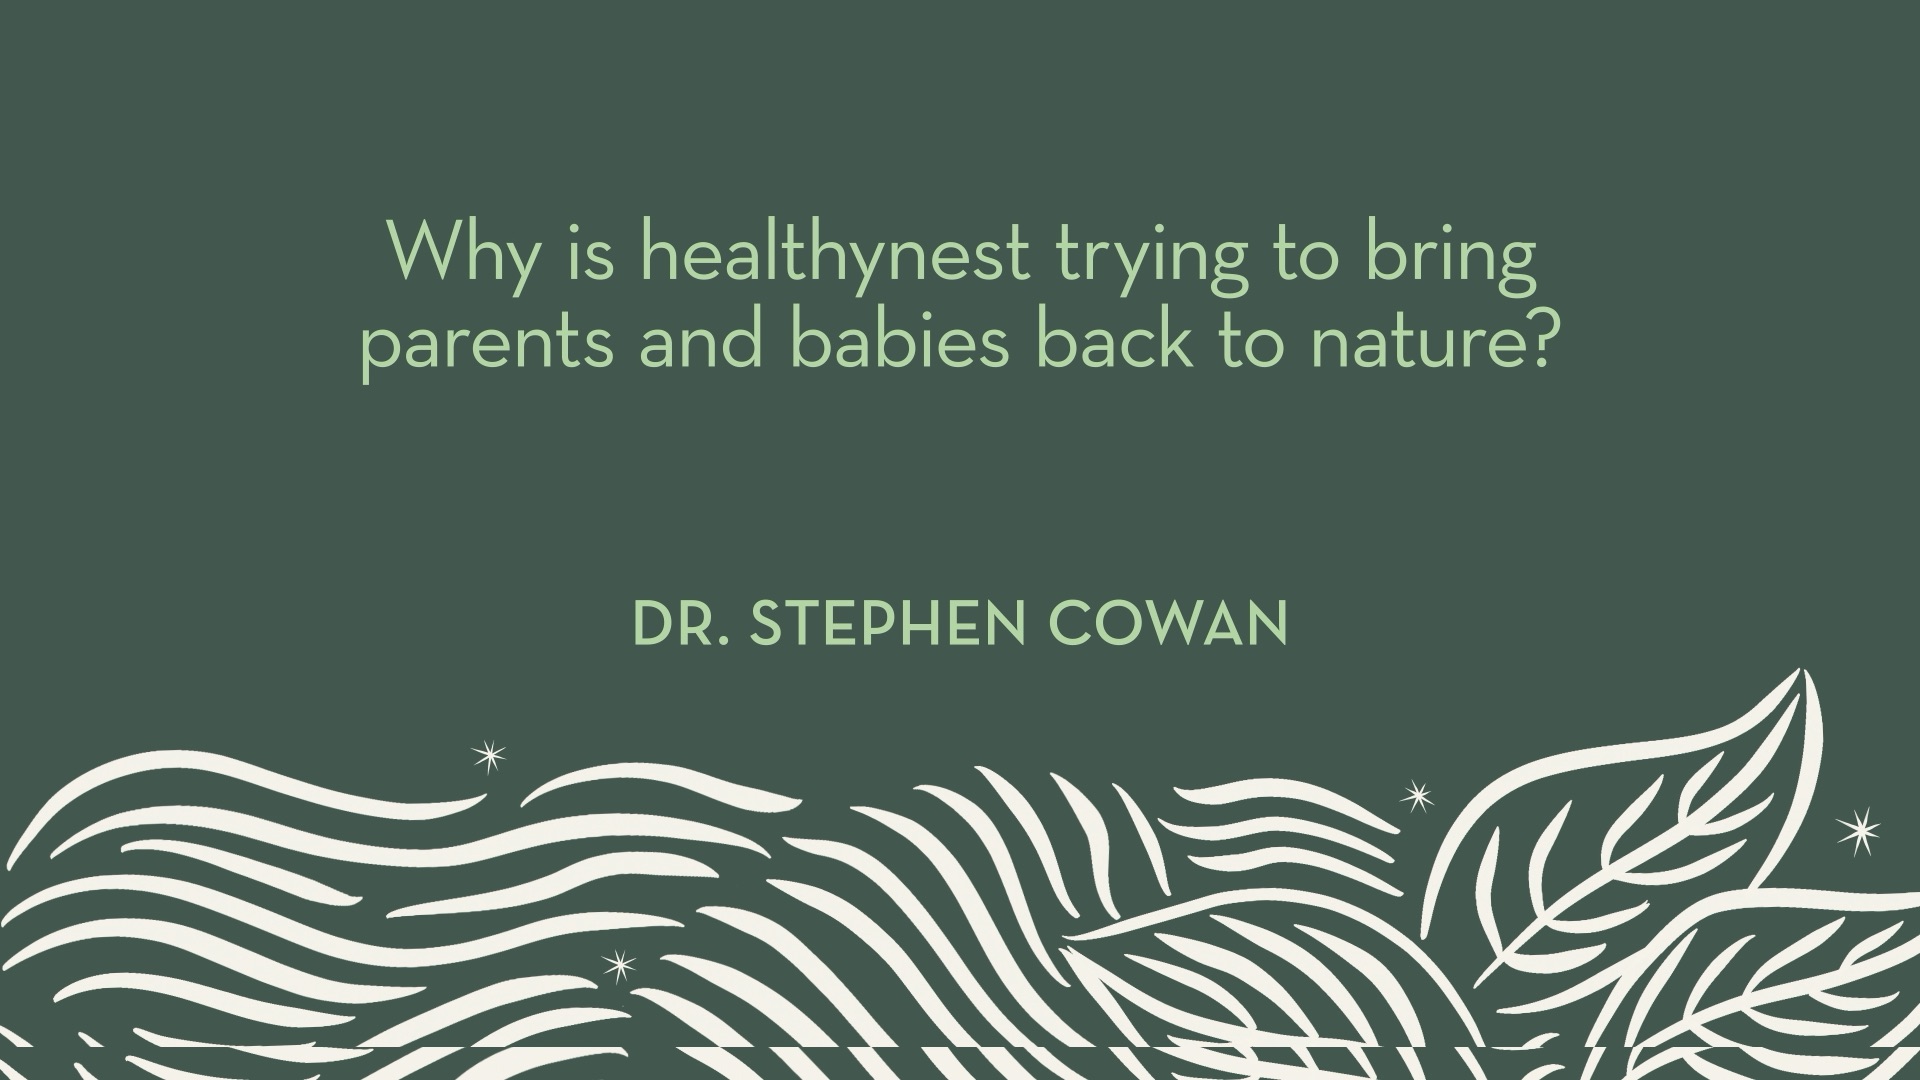 Dr. Cowan | Why is healthynest trying to bring parents and babies back to nature?